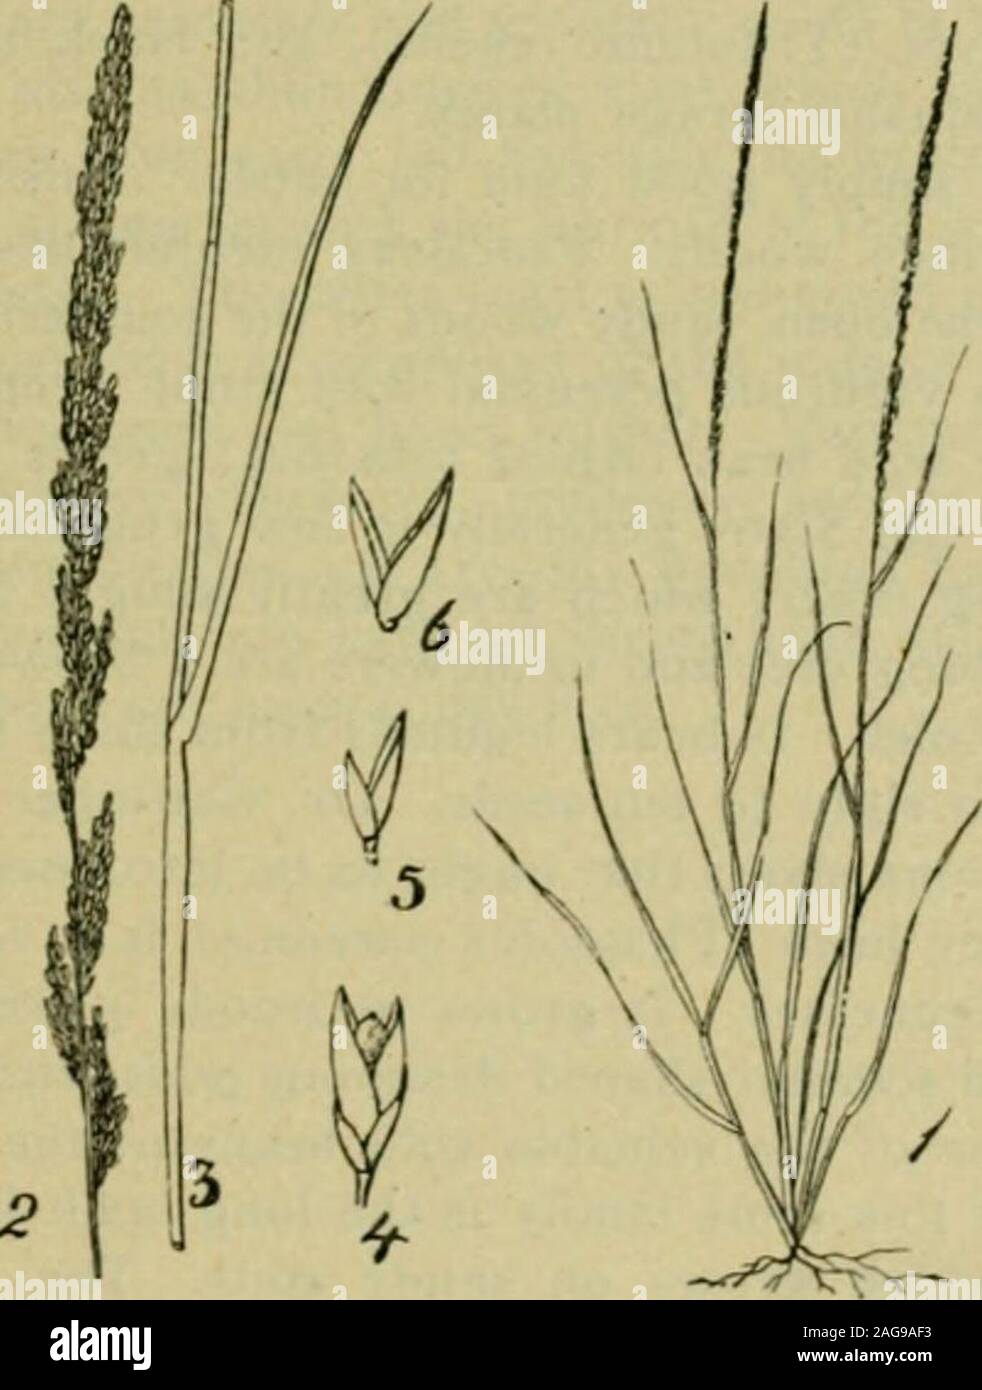 . Grasses and forage plants, by J.B. Killebrew. essee fescue (Festucarubra glauccsccns); various species of Paspalum and Panicum; blue grass(Poa pratensis); annual spear grass (Poa annua); English blue grass 189 t Poa cotnpressa) and other species of Poa. All these are foundintermingled with the wild indigenous grasses to a greater or lessextent in the highway pastures of the State. The beard grasses (Andro-pogons) form by far the largest number of grasses that occur in the nat-ural pastures on the Cumberland table-land and on the Highland Rim. WILD LEGUMINOUS AND OTHER FORAGE PLANTS FOUNDIN T Stock Photo